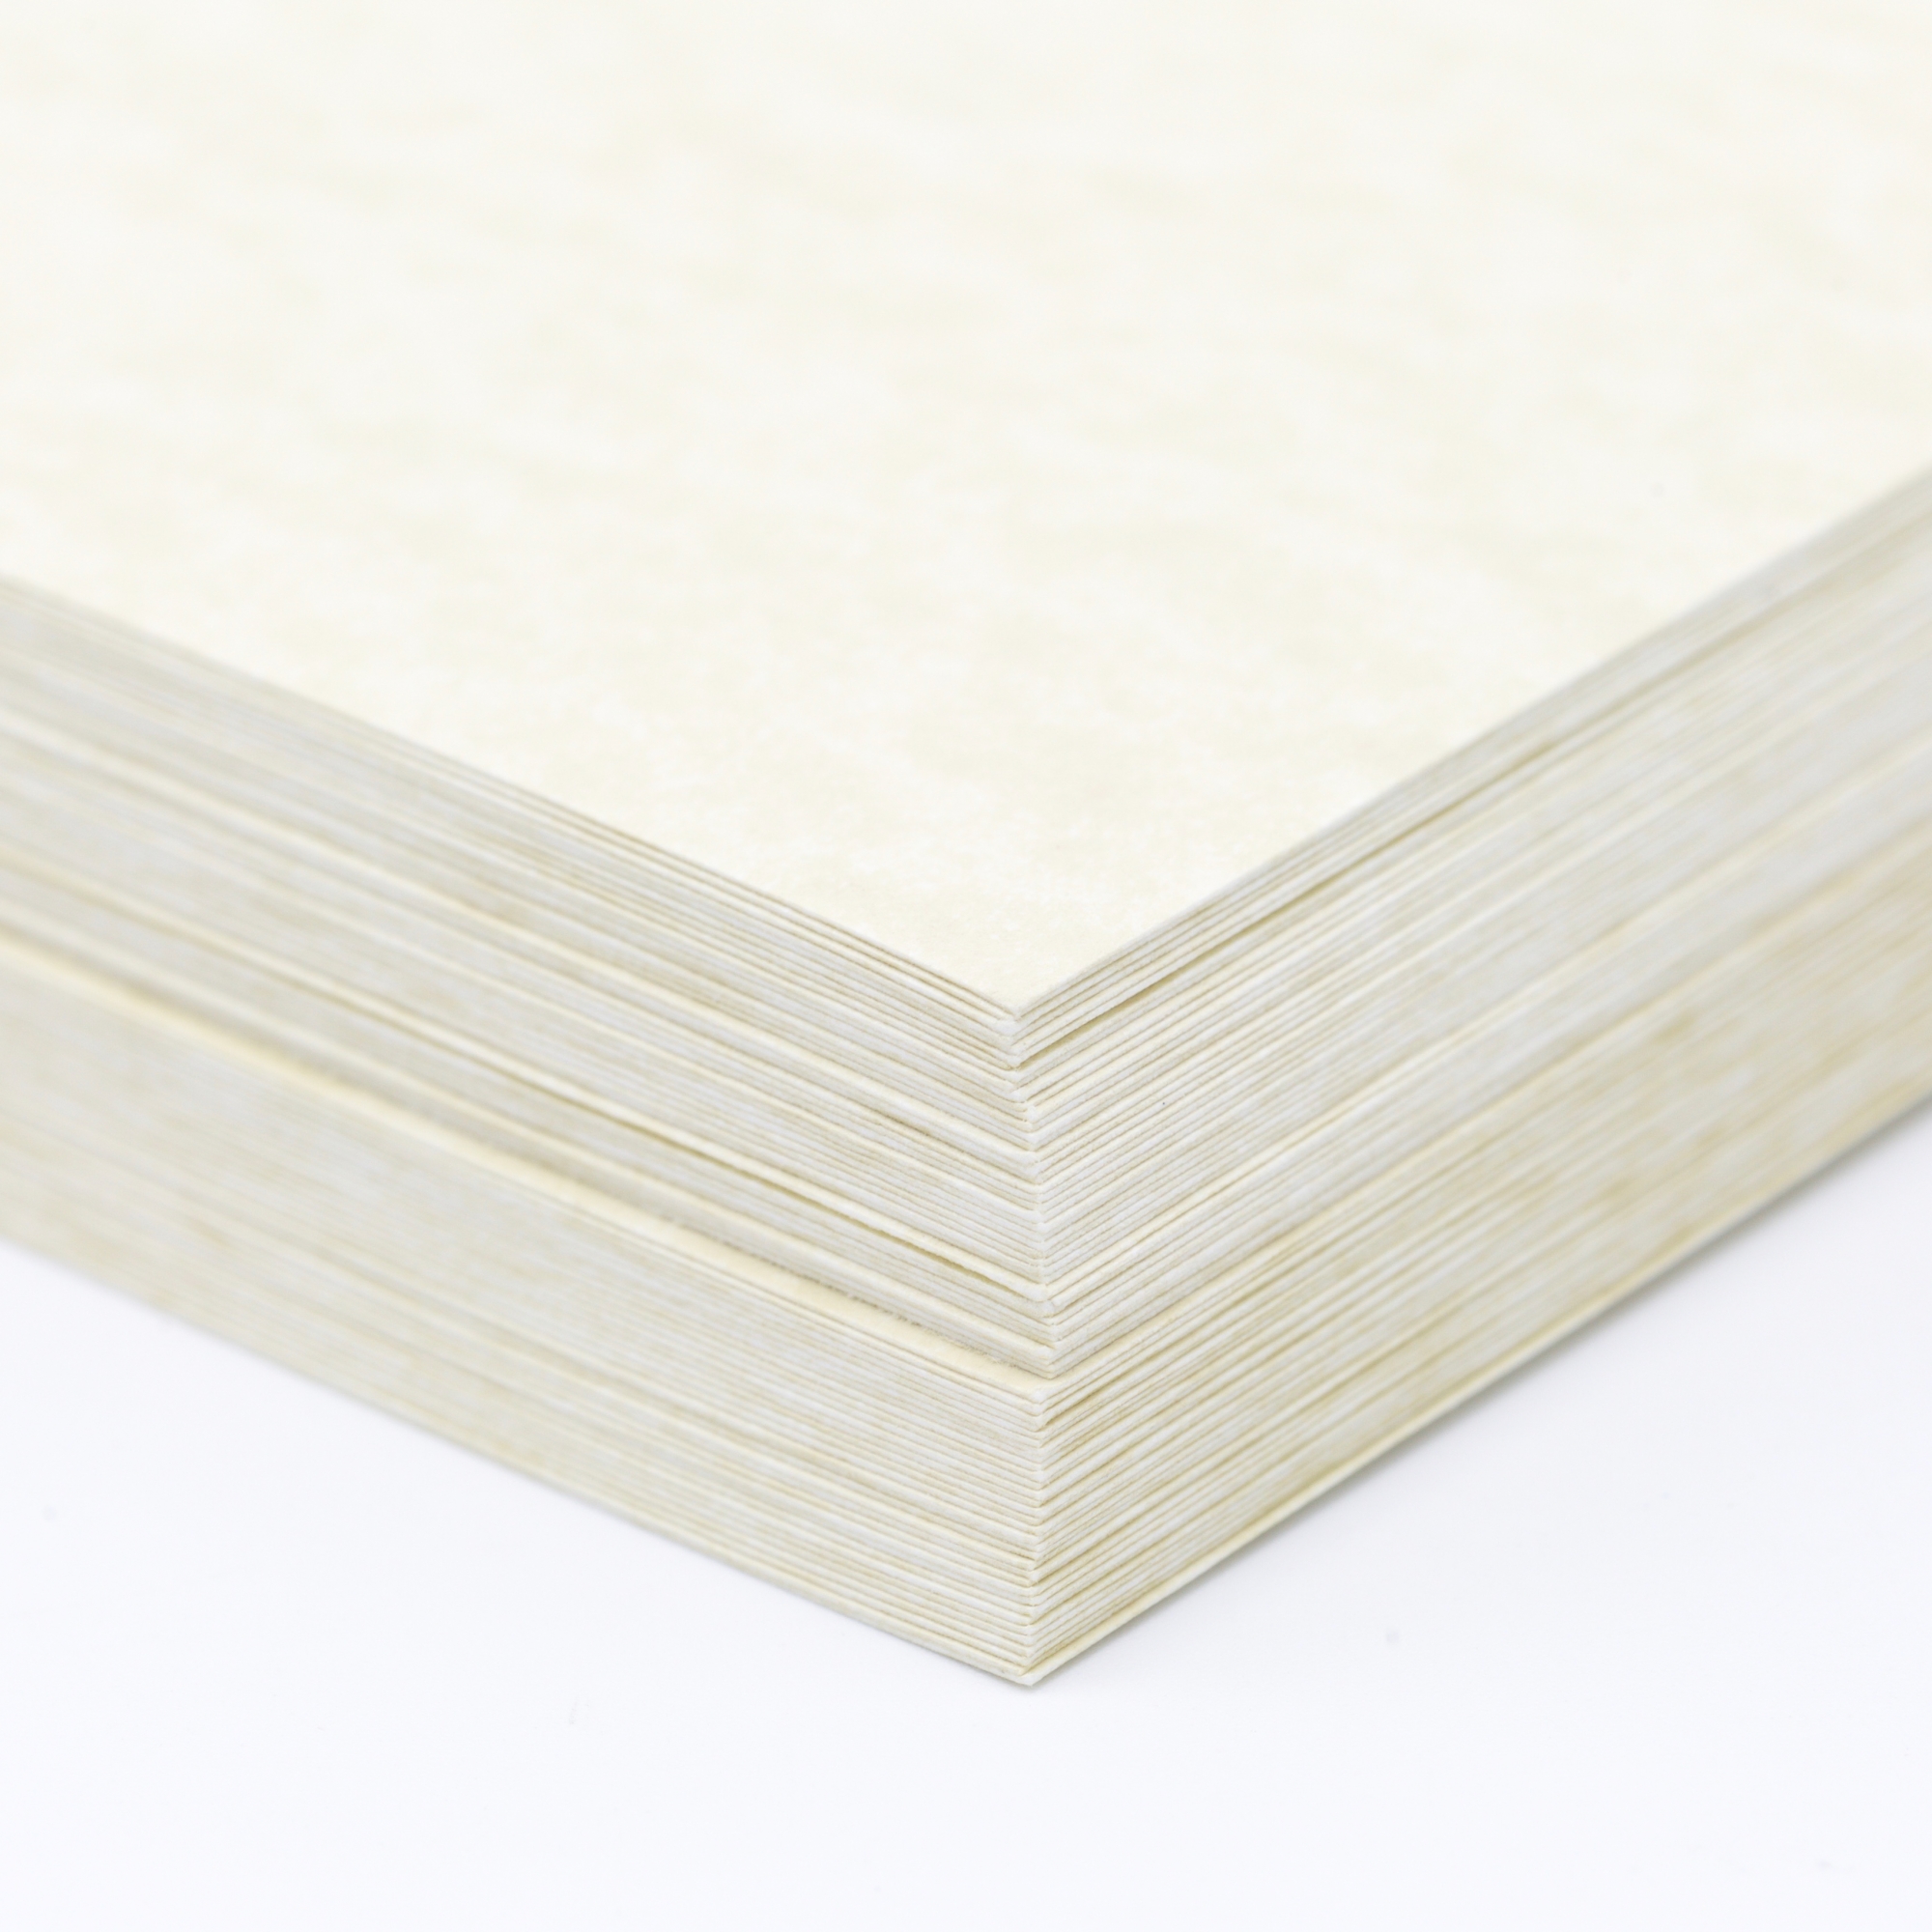 8.5 x 14 White Legal Size Card Stock Paper - 250 Sheets - 65lb Cover Cardstock - Perfect for Documents, Programs, Menus, Size: 8 1/2 x 14